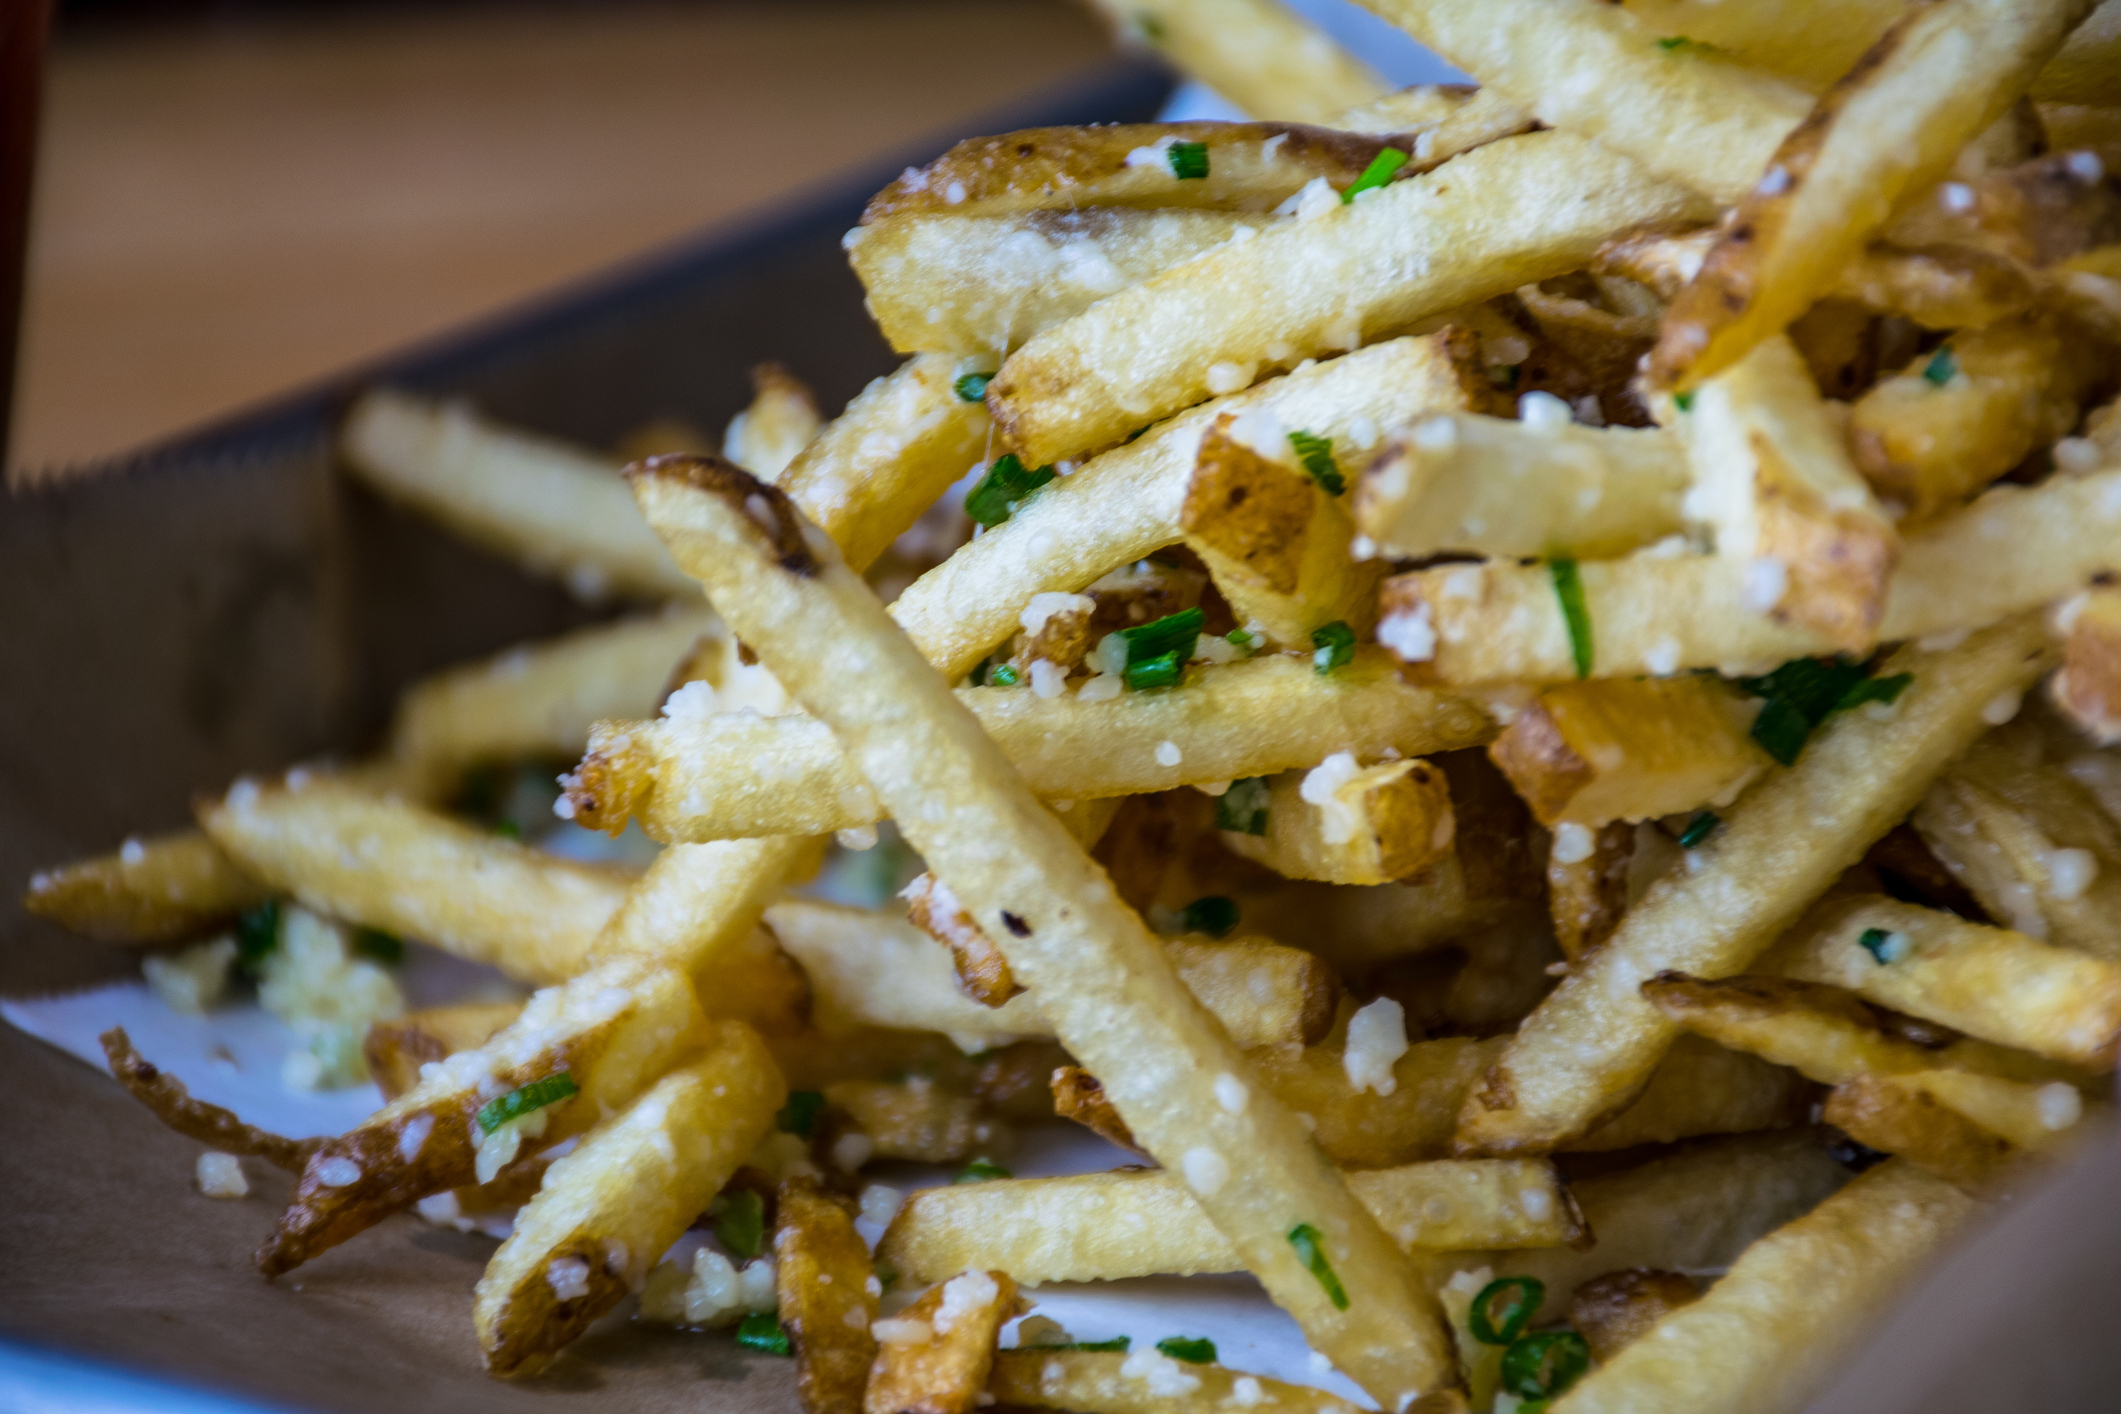 Bowl of French fries garnished with parsley and grated cheese